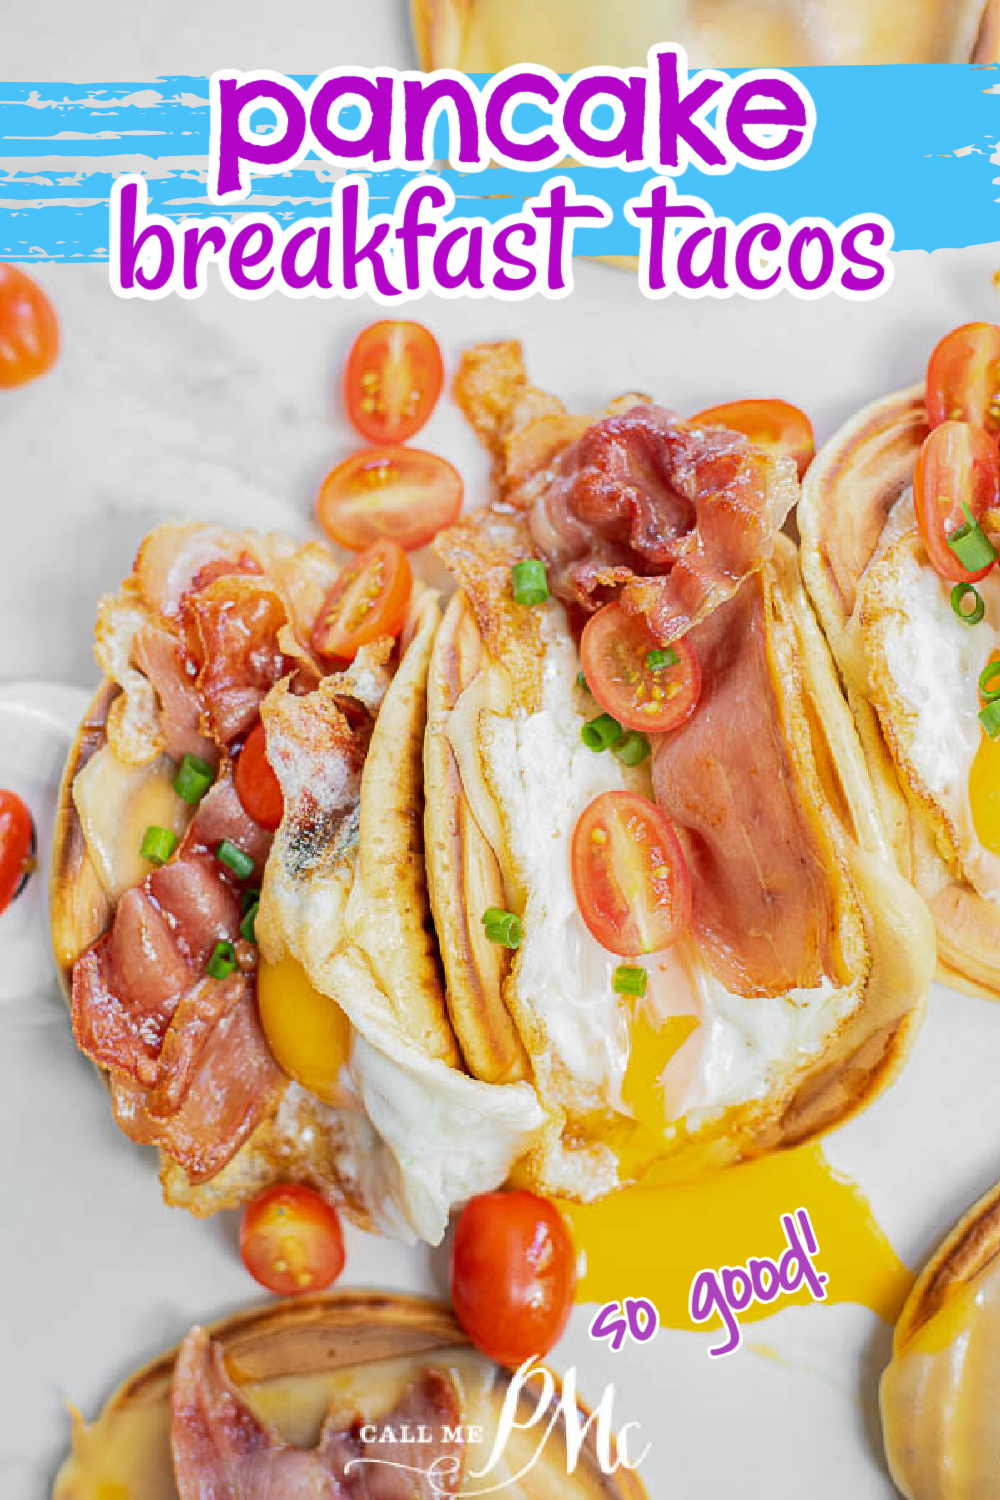 Breakfast Pancake Tacos Recipe by Call Me PMc. All your favorite breakfast items in a fluffy homemade pancake. Fun alternative to your traditional breakfast. #breakfast #tacos #pancakes #callmepmc